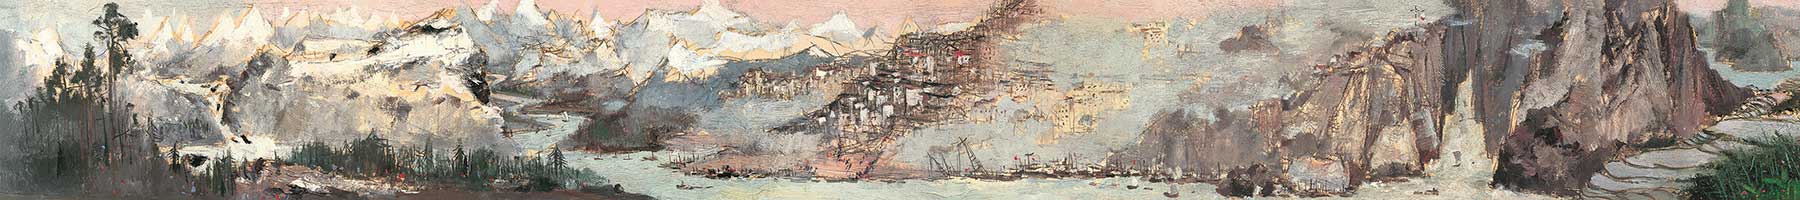 detail from Wu Guanzhong, The Yangtze River in 1974 oil painting